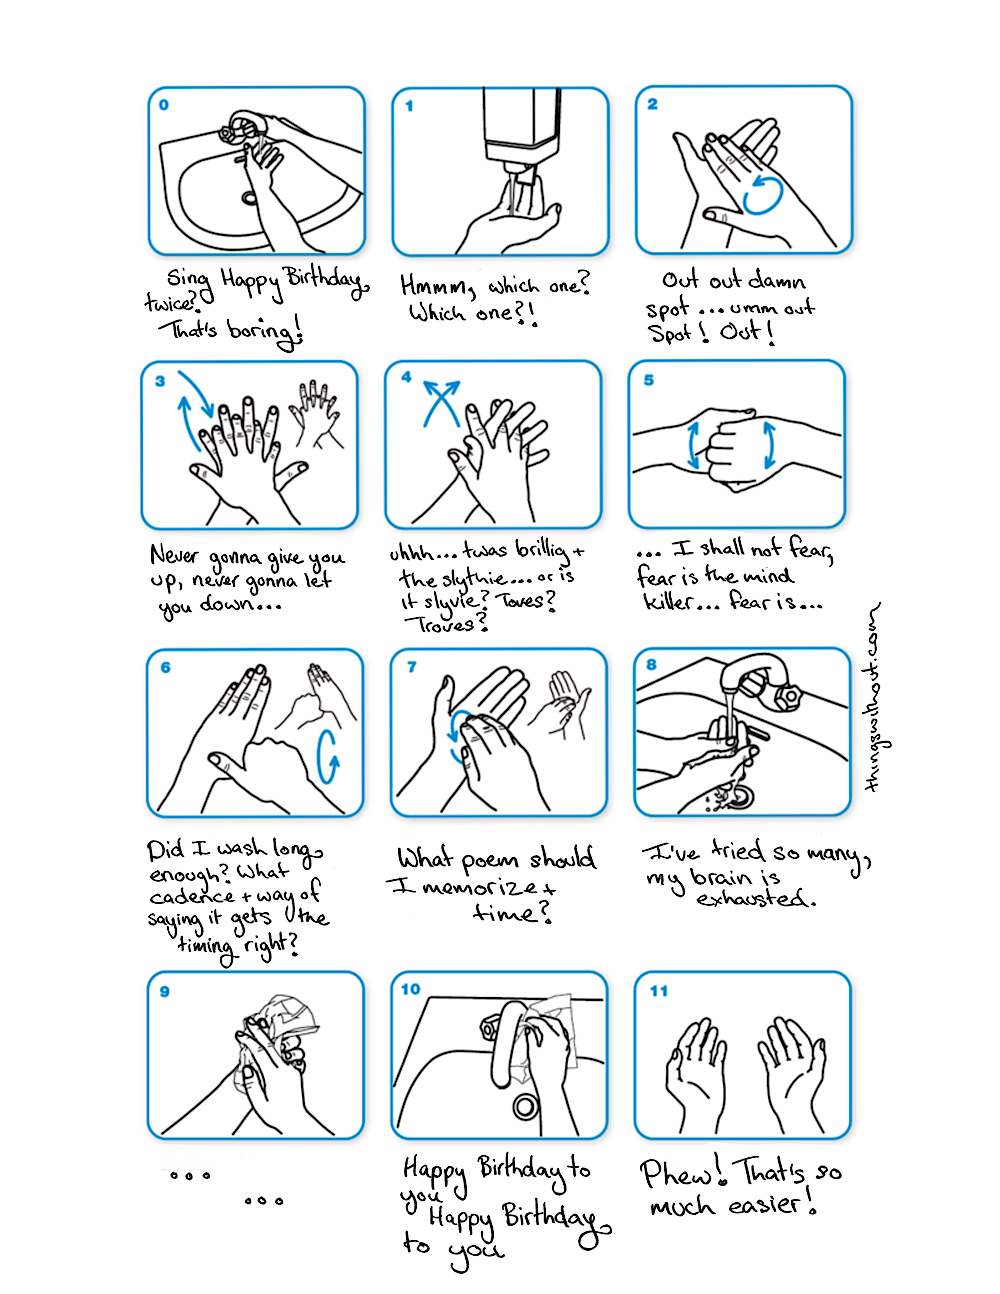 Webcomic Transcript Hand washing diagram from World Health Organization with modified text. Sing Happy Birthday twice? That’s boring! Hmmm, which one? Which one?! Out out damn spot... umm... out Spot! Out! Never gonna give you up, never gonna let you down... Uhhh... twas brillig and the slythie... or is it slyvie? Toves? Troves? ... I shall not fear, fear is the mind killer... fear is... Did I wash long enough? What cadence and way of saying it gets the timing right? What poem should I memorize and time? I’ve tried so many, my brain is exhausted. ... ... Happy Birthday to you, Happy Birthday to you Phew! That’s so much easier!